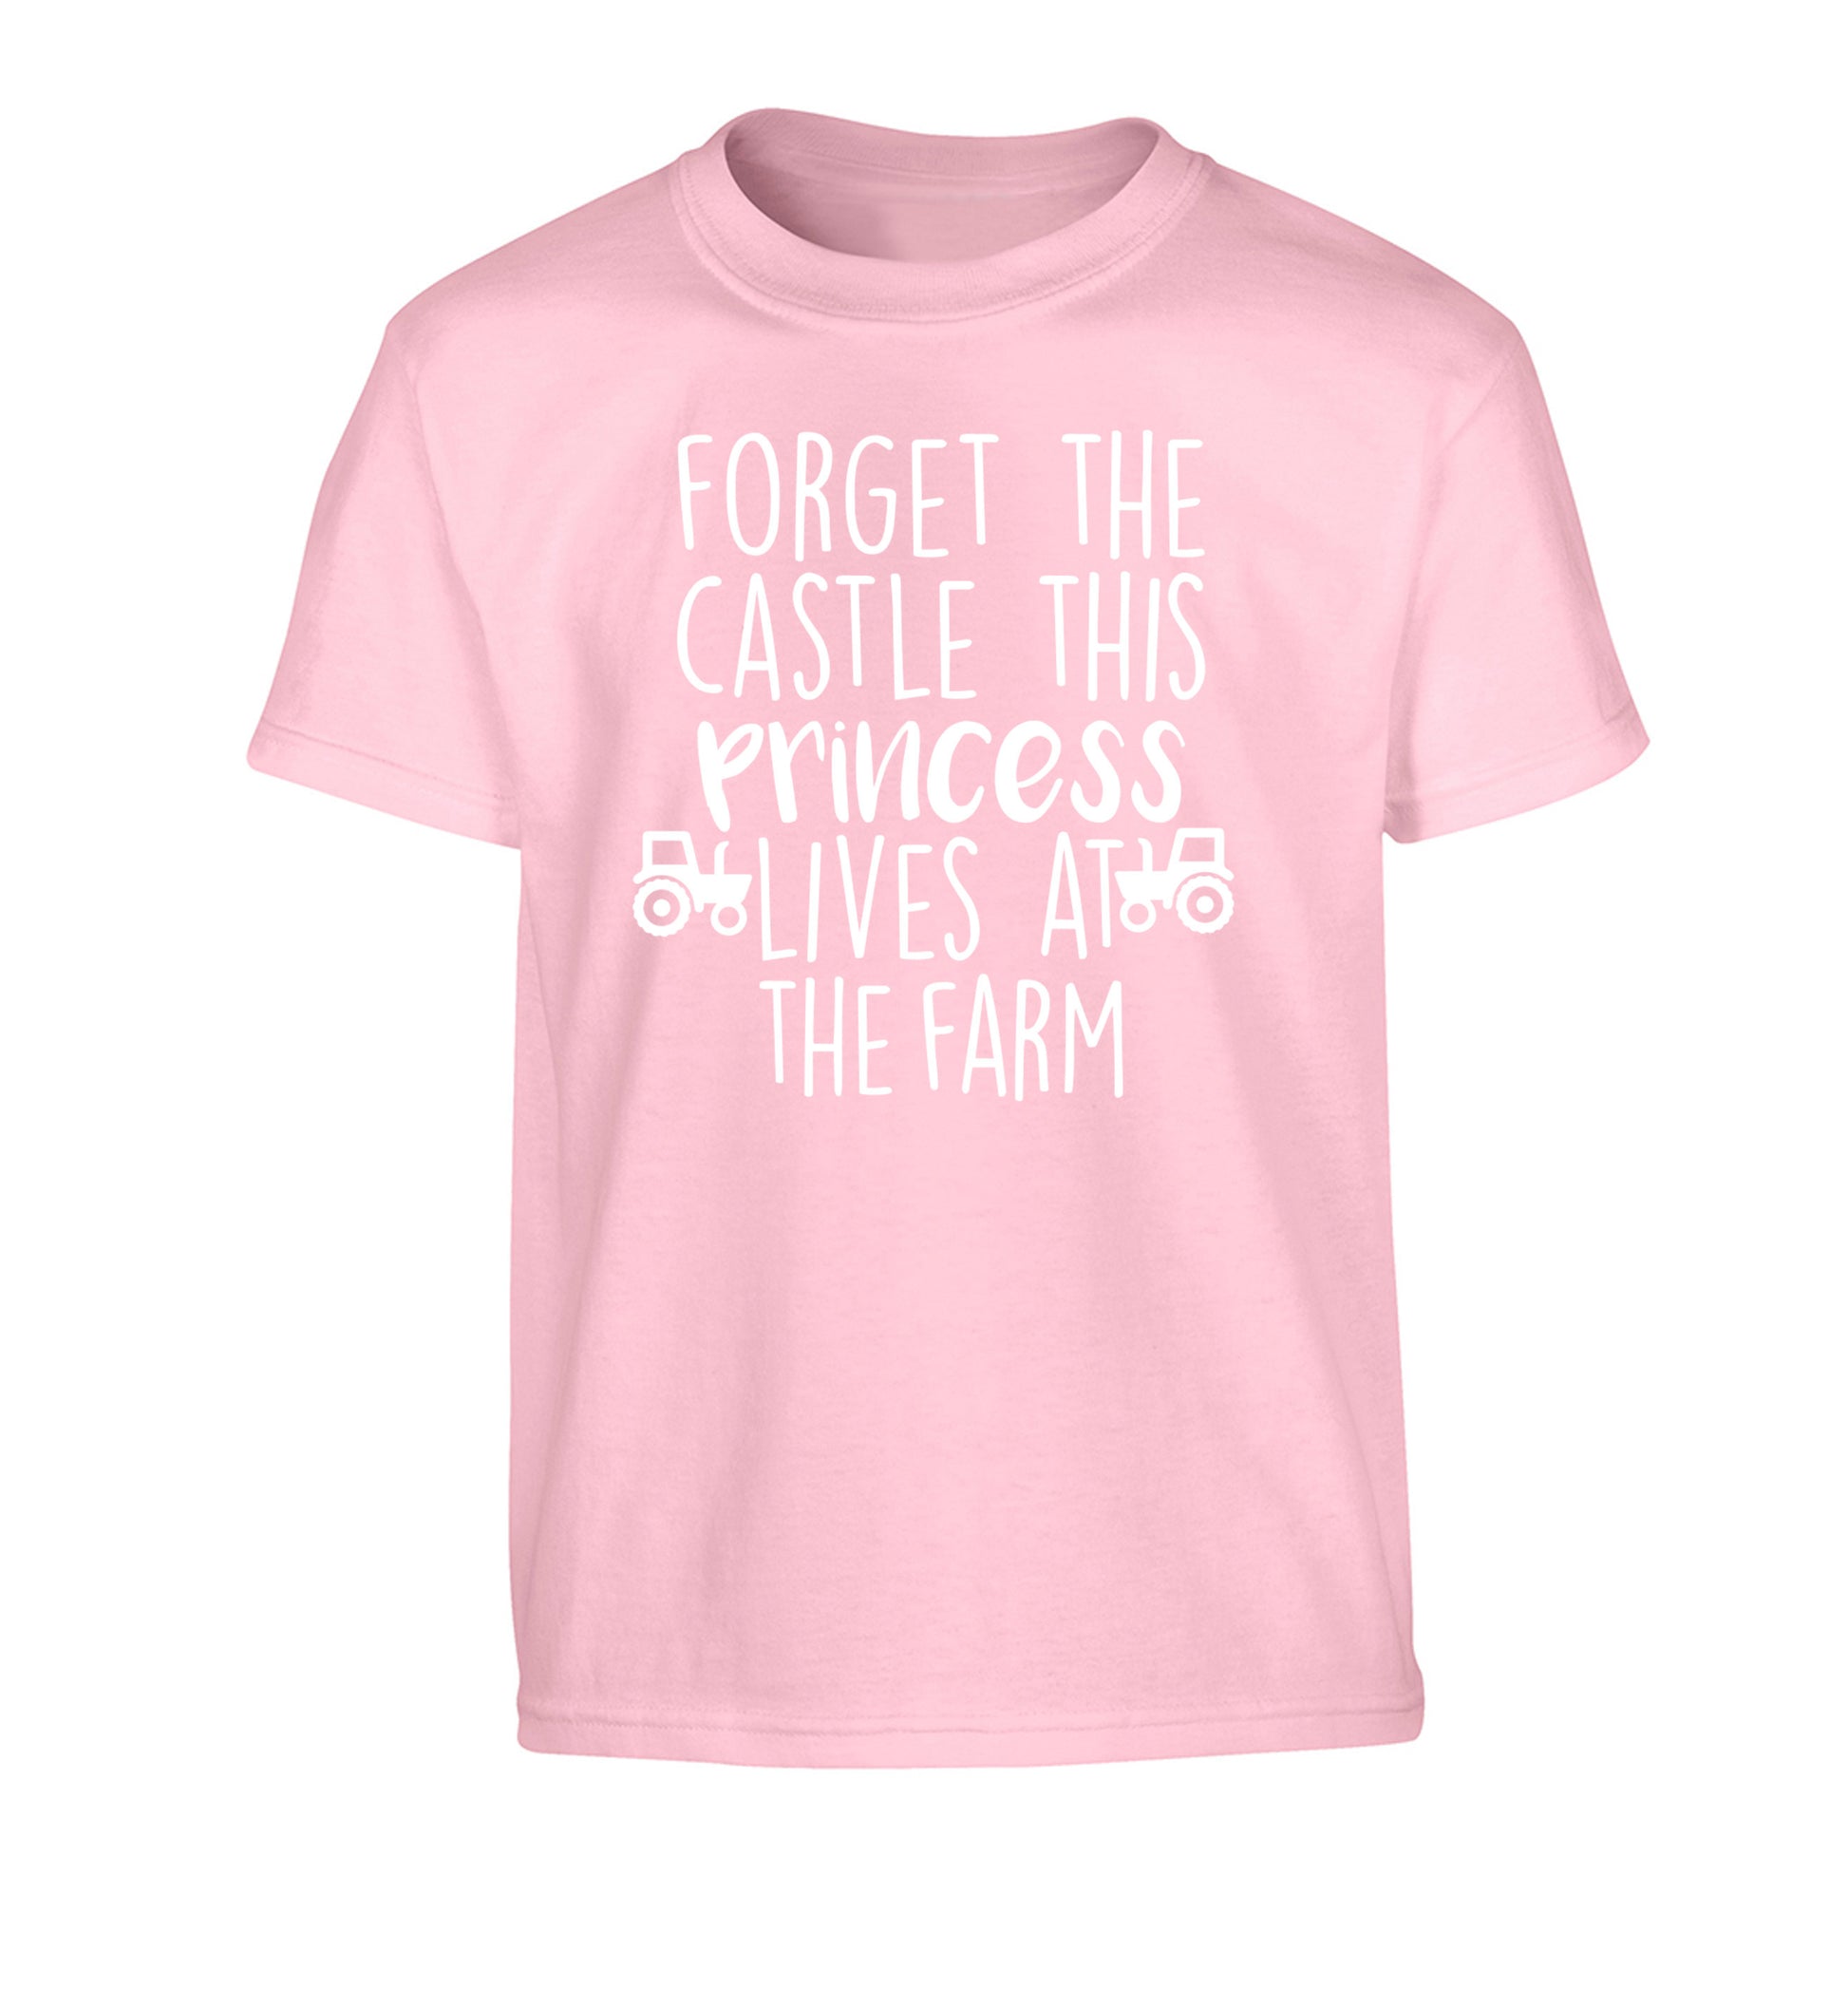 Forget the castle this princess lives at the farm Children's light pink Tshirt 12-14 Years